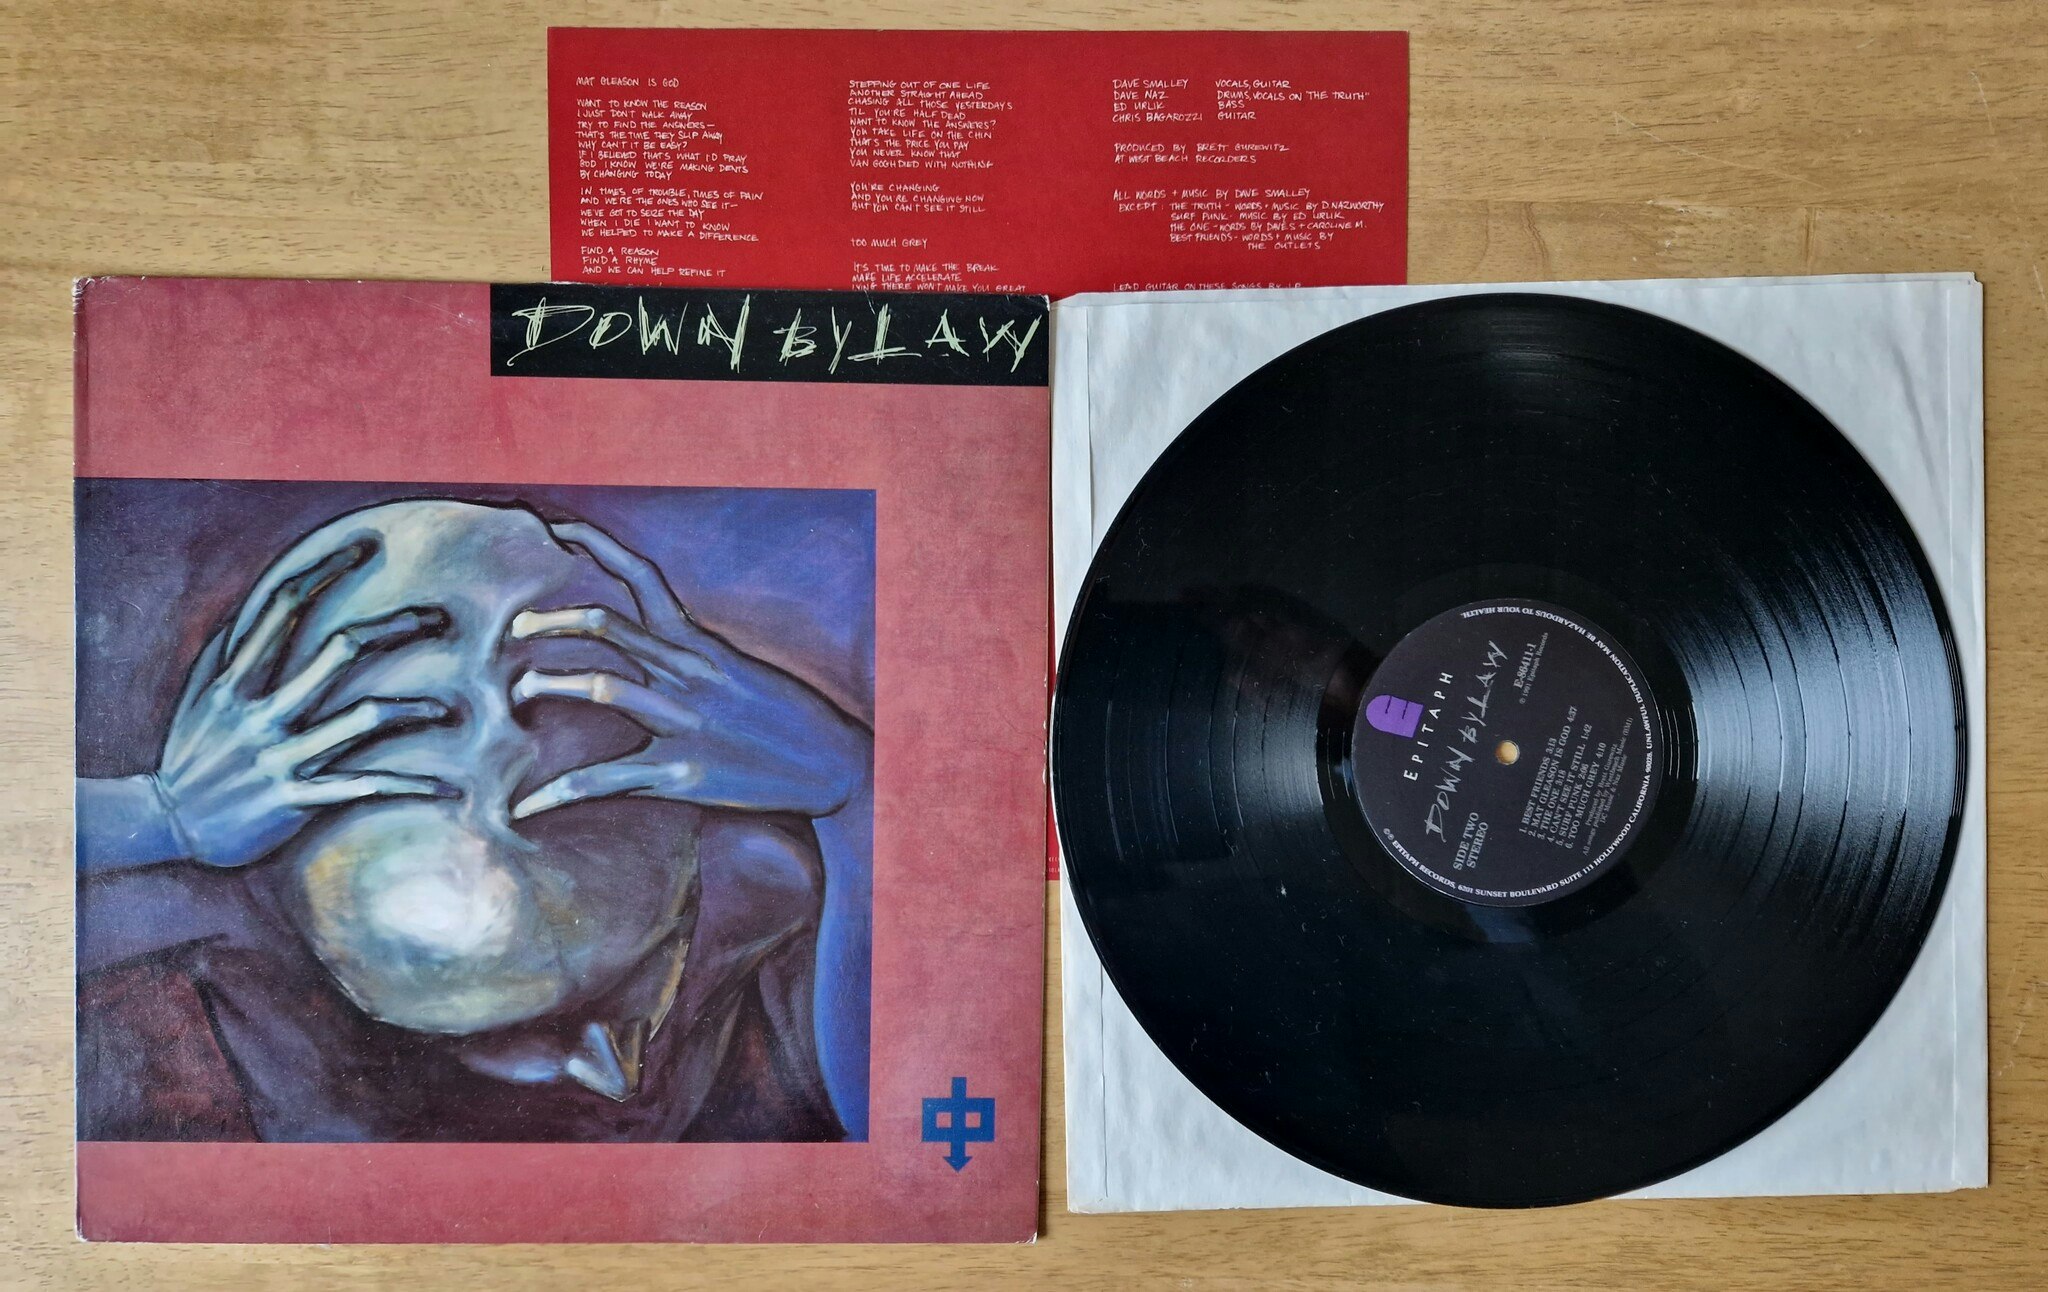 Down by law, Down by law. Vinyl LP